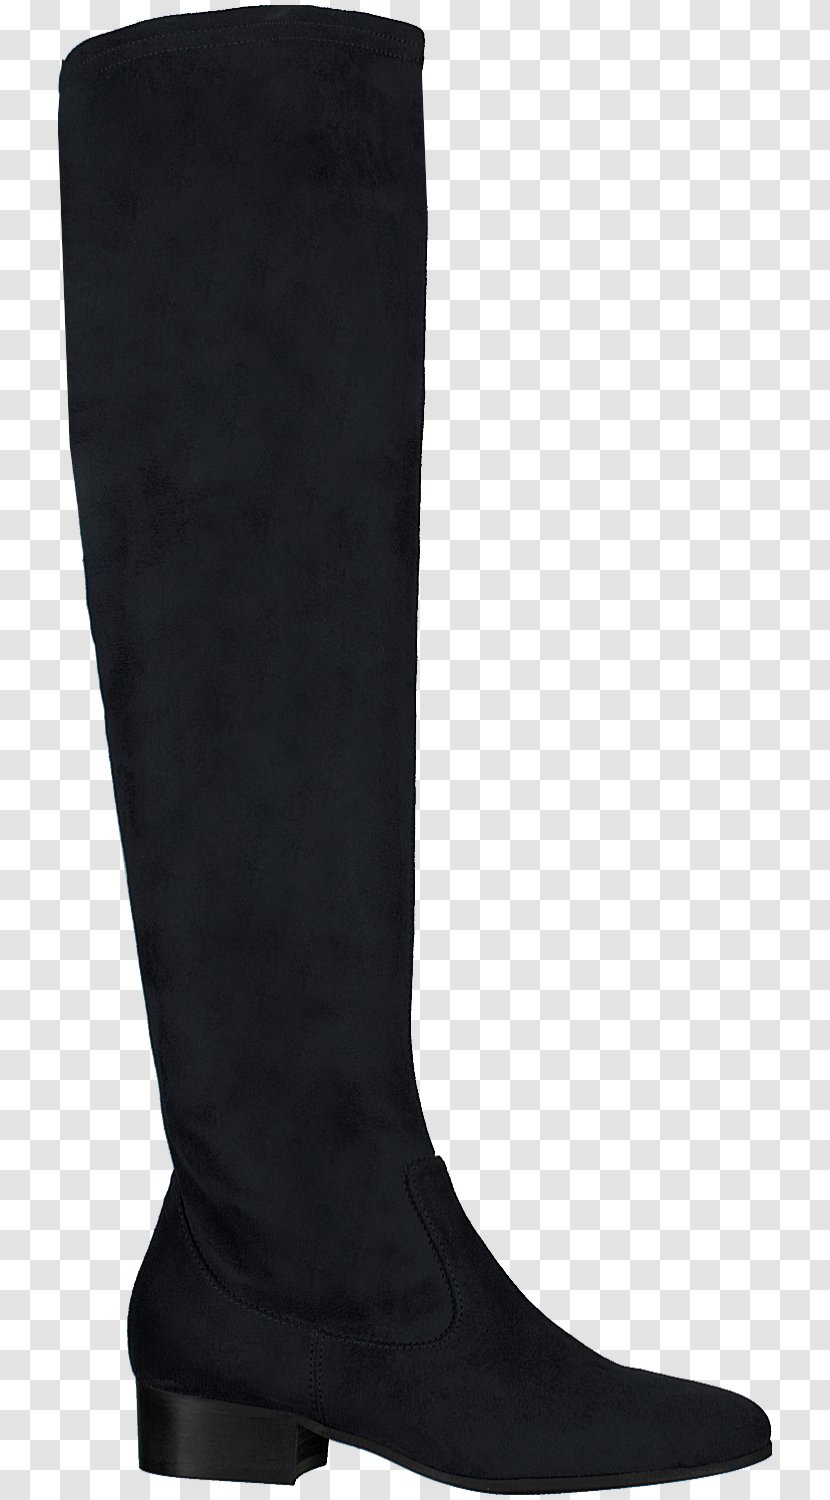 Riding Boot Shoe Knee-high Fashion - Footwear - Knee High Boots Transparent PNG